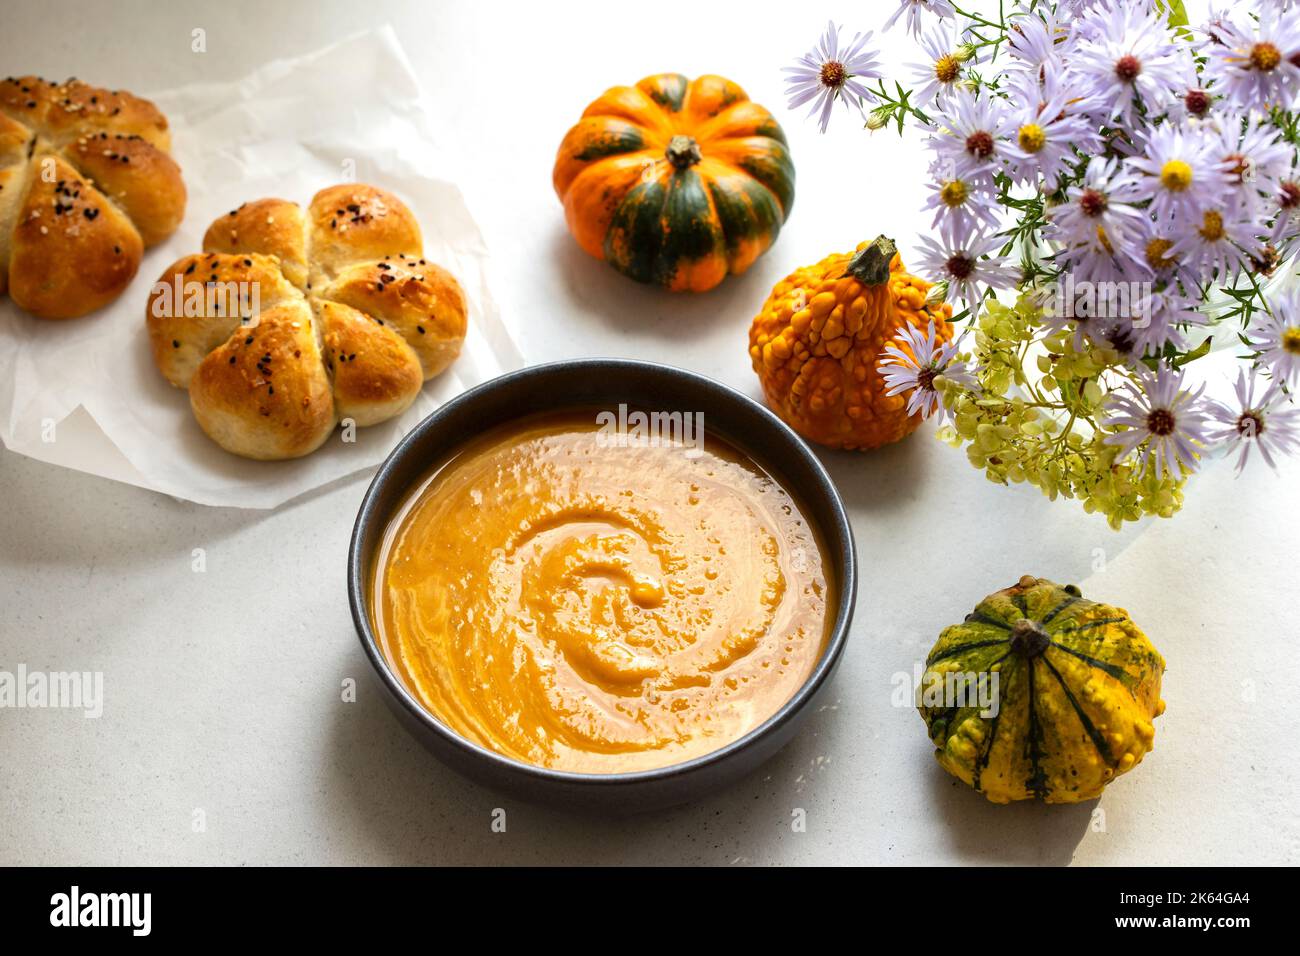 Pumkin soup with freshly baked bread roll Stock Photo